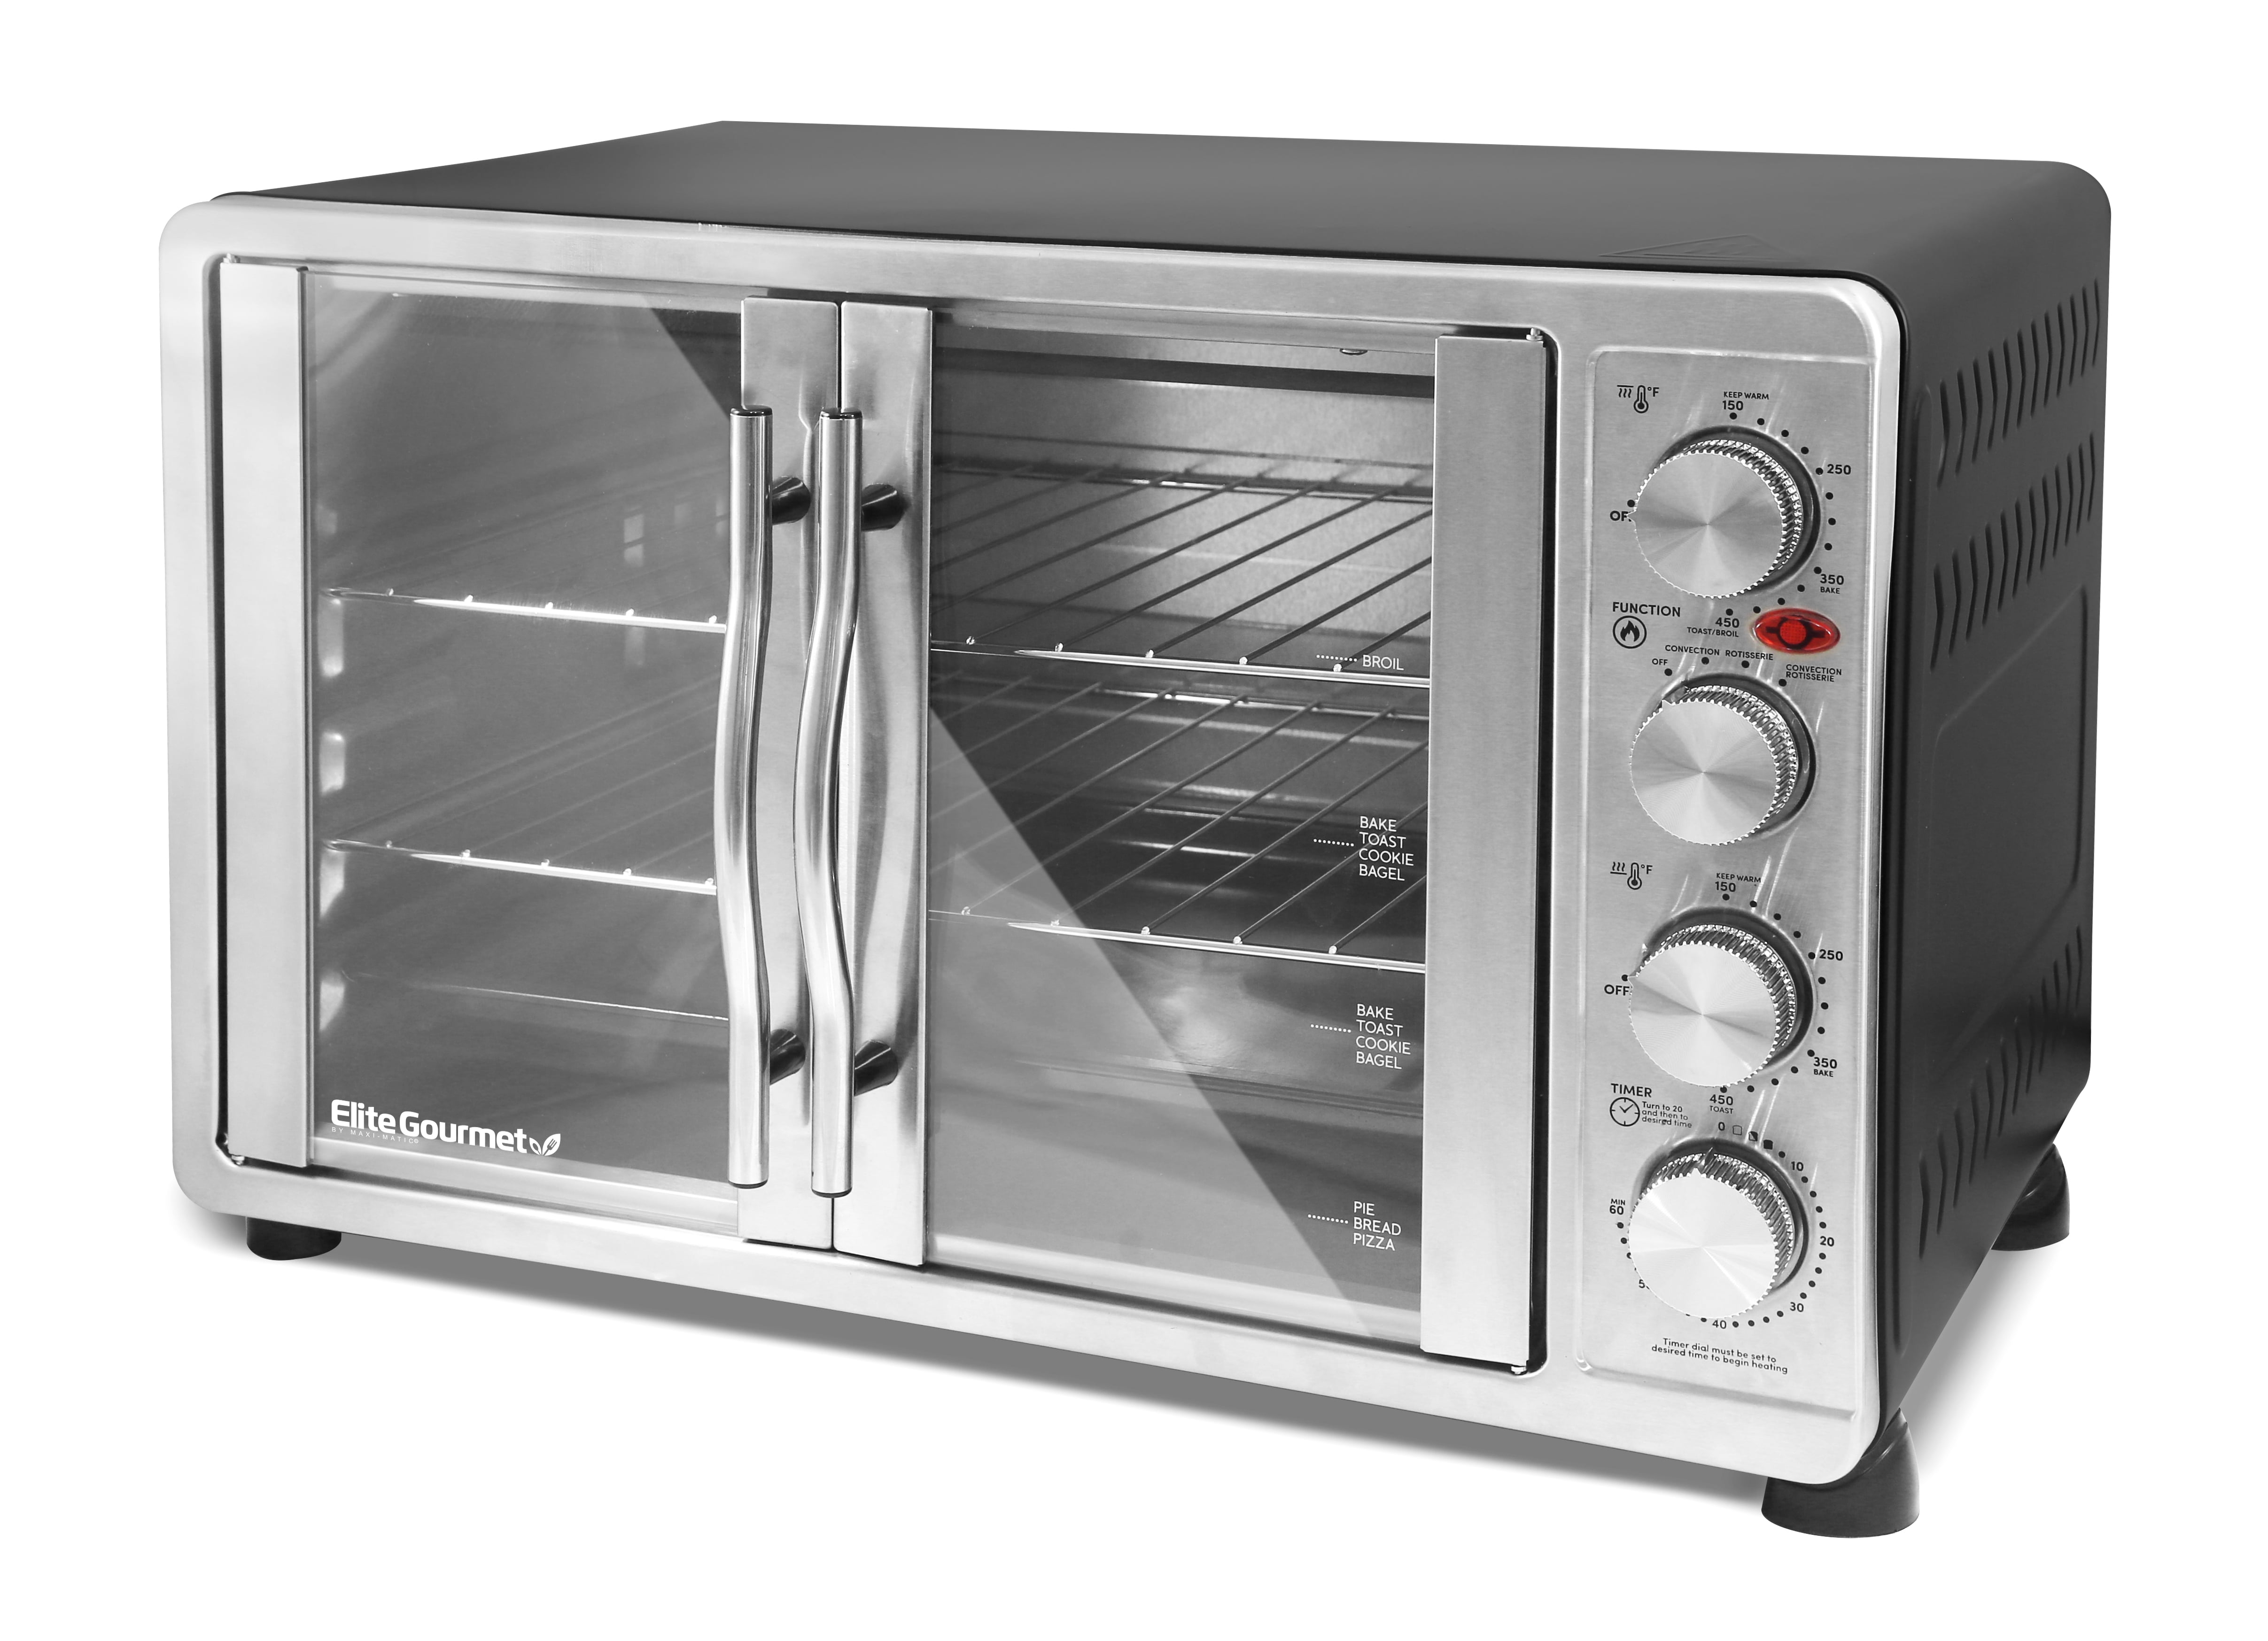 Oster Convection Oven, 8-in-1 Countertop Toaster Oven, XL Fits 2 16  Pizzas, Stainless Steel French Door for Sale in Miami Gardens, FL - OfferUp